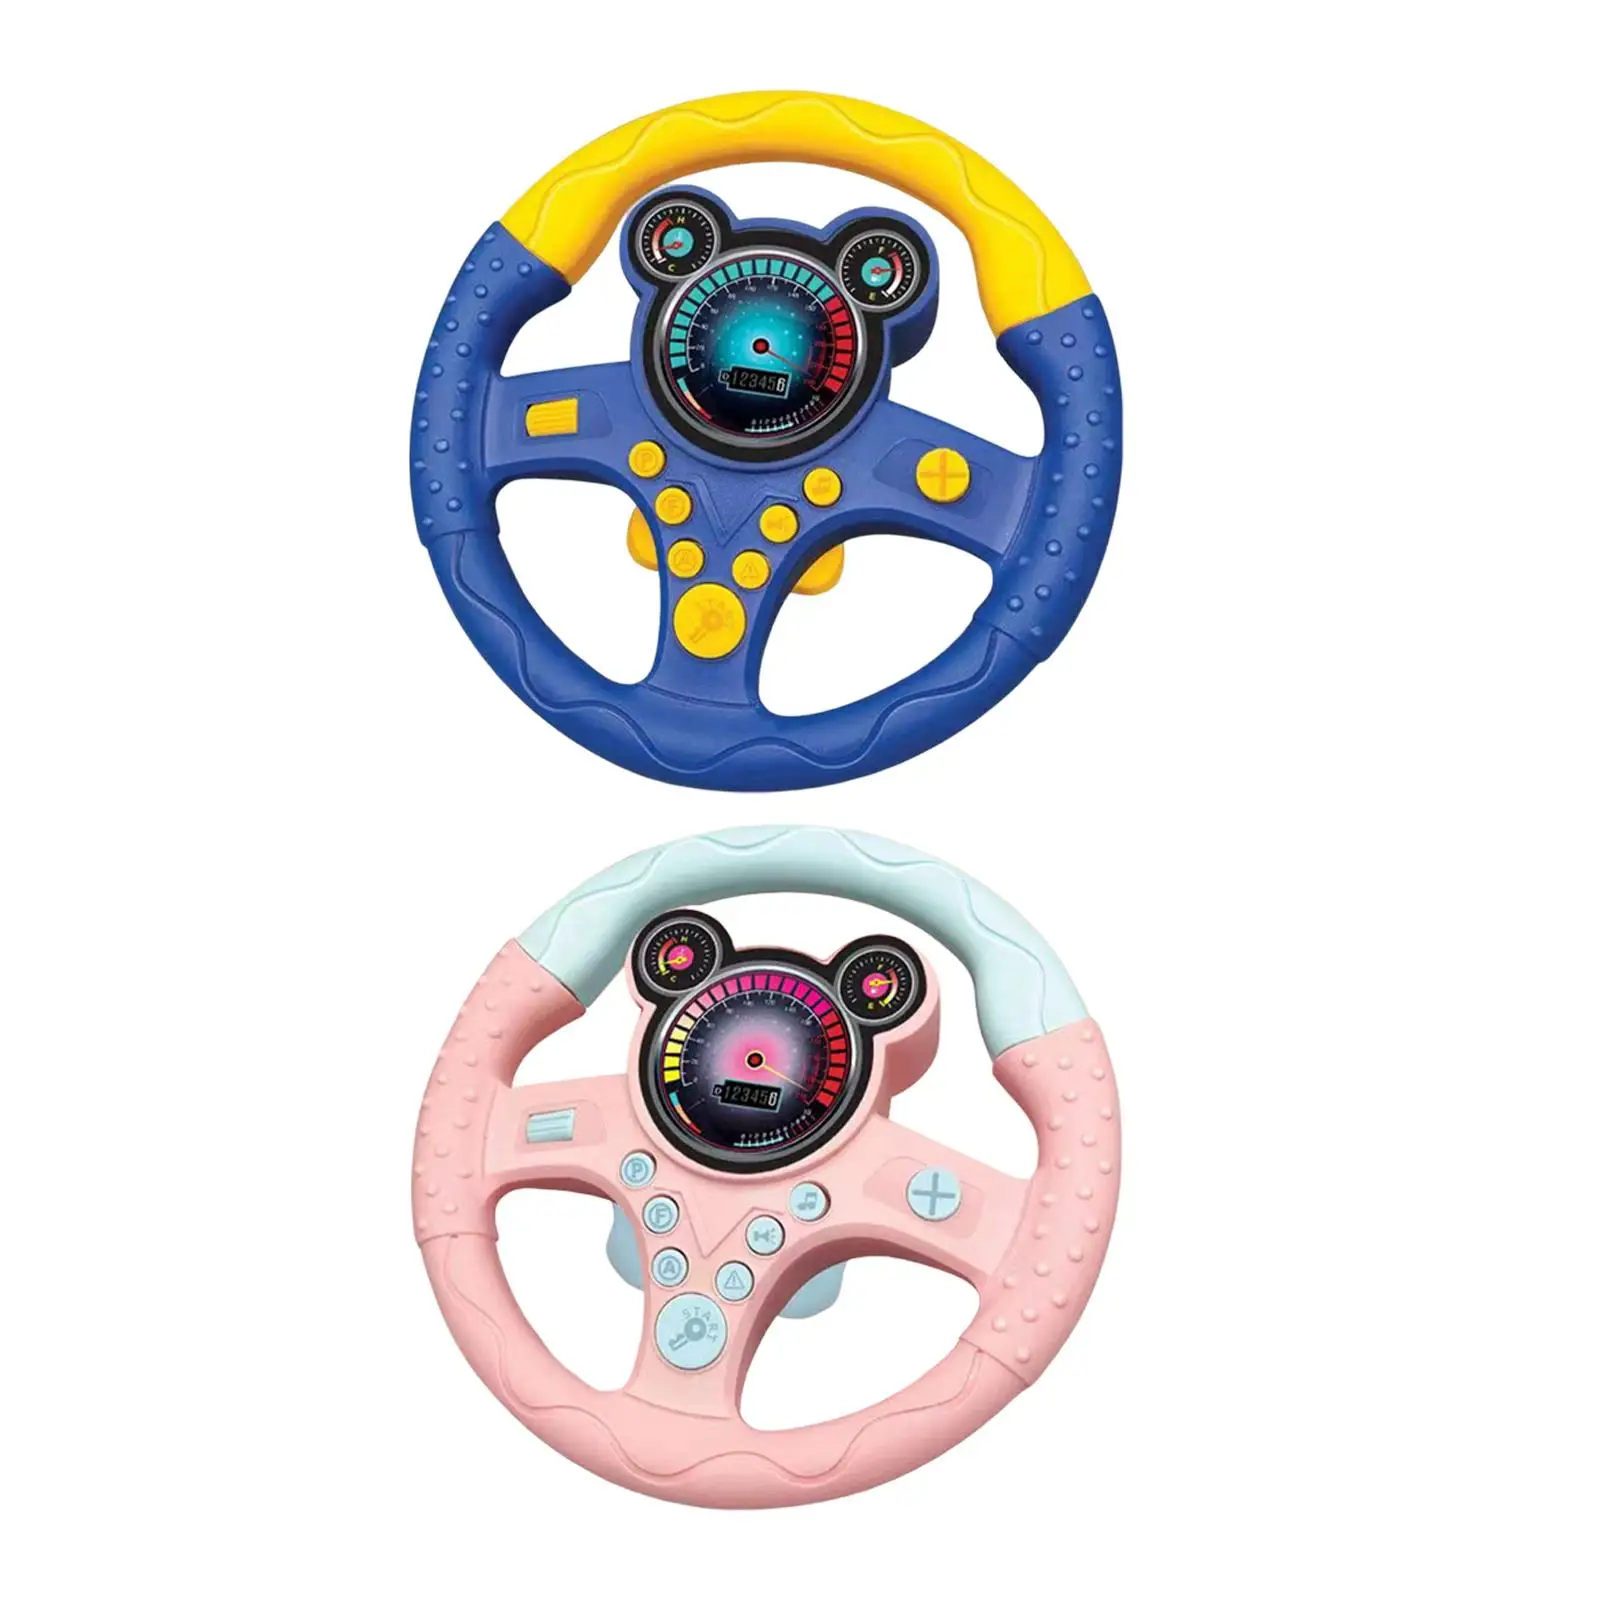 Simulation Car Driving Toy Interactive Toys with Music Busy Board DIY Accessory for Backyard Outdoor Climbing Frame Busy Board